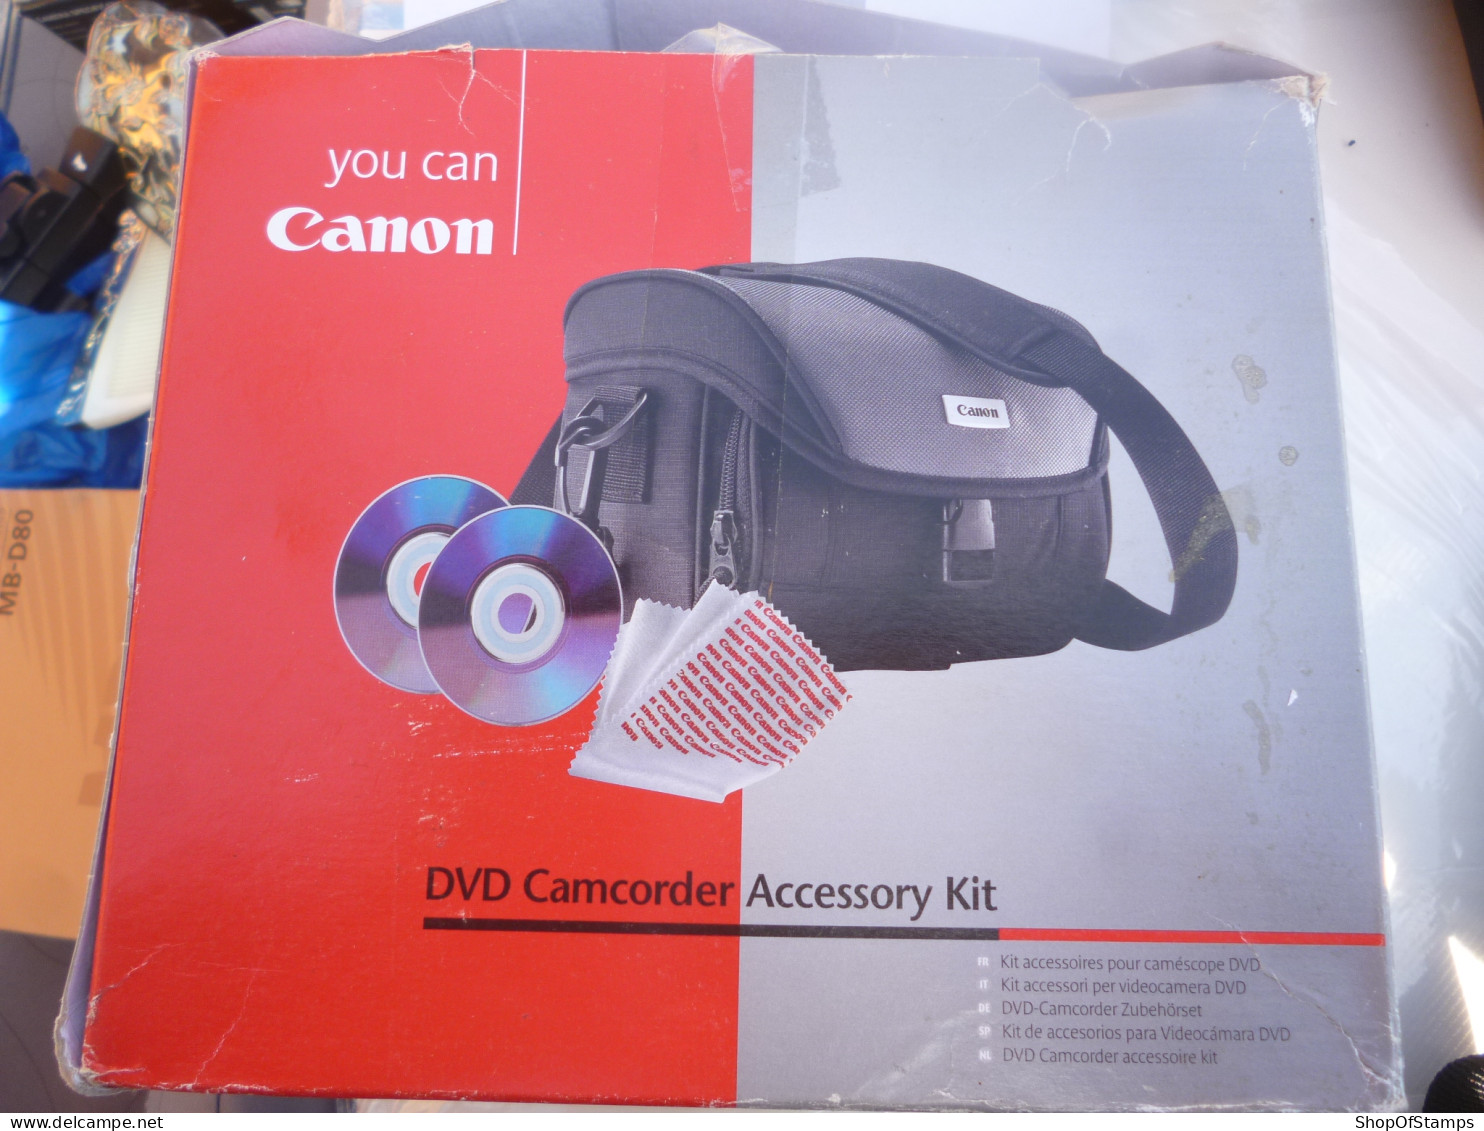 CAMERA ACCESSORIES: CANON DVD CAMCORDER KIT - Supplies And Equipment